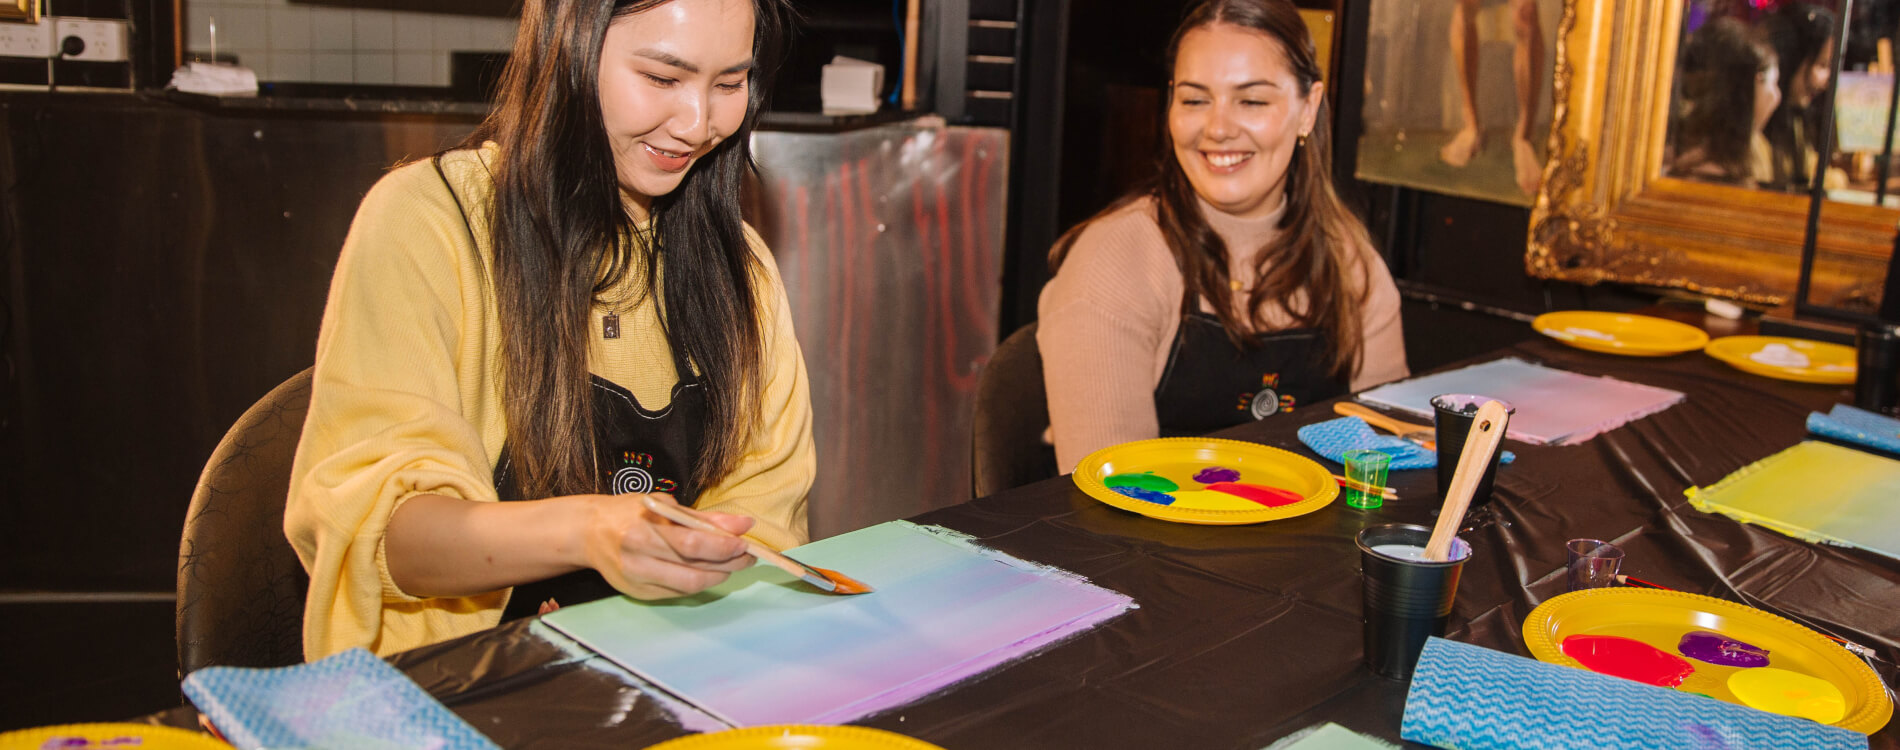 7 Unique Painting Classes In Brisbane To Try 1600 ?1659511504